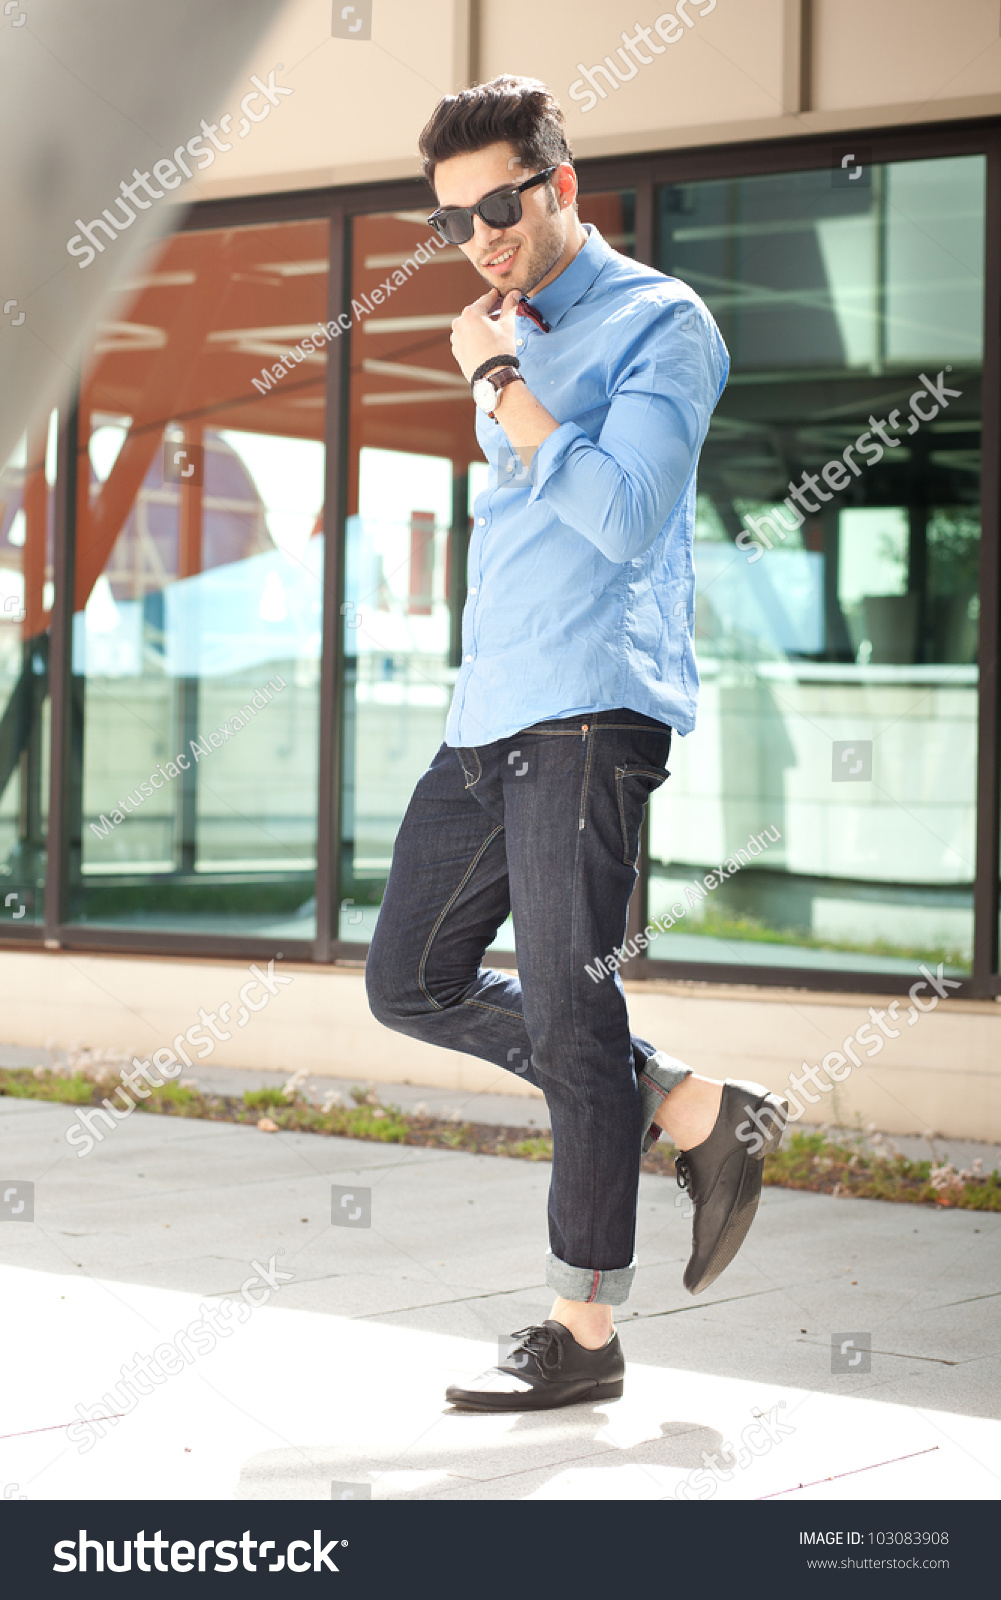 Attractive Young Male Model Posing Outdoors Stock Photo Edit Now 103083908 Click here to become a model: https www shutterstock com image photo attractive young male model posing outdoors 103083908